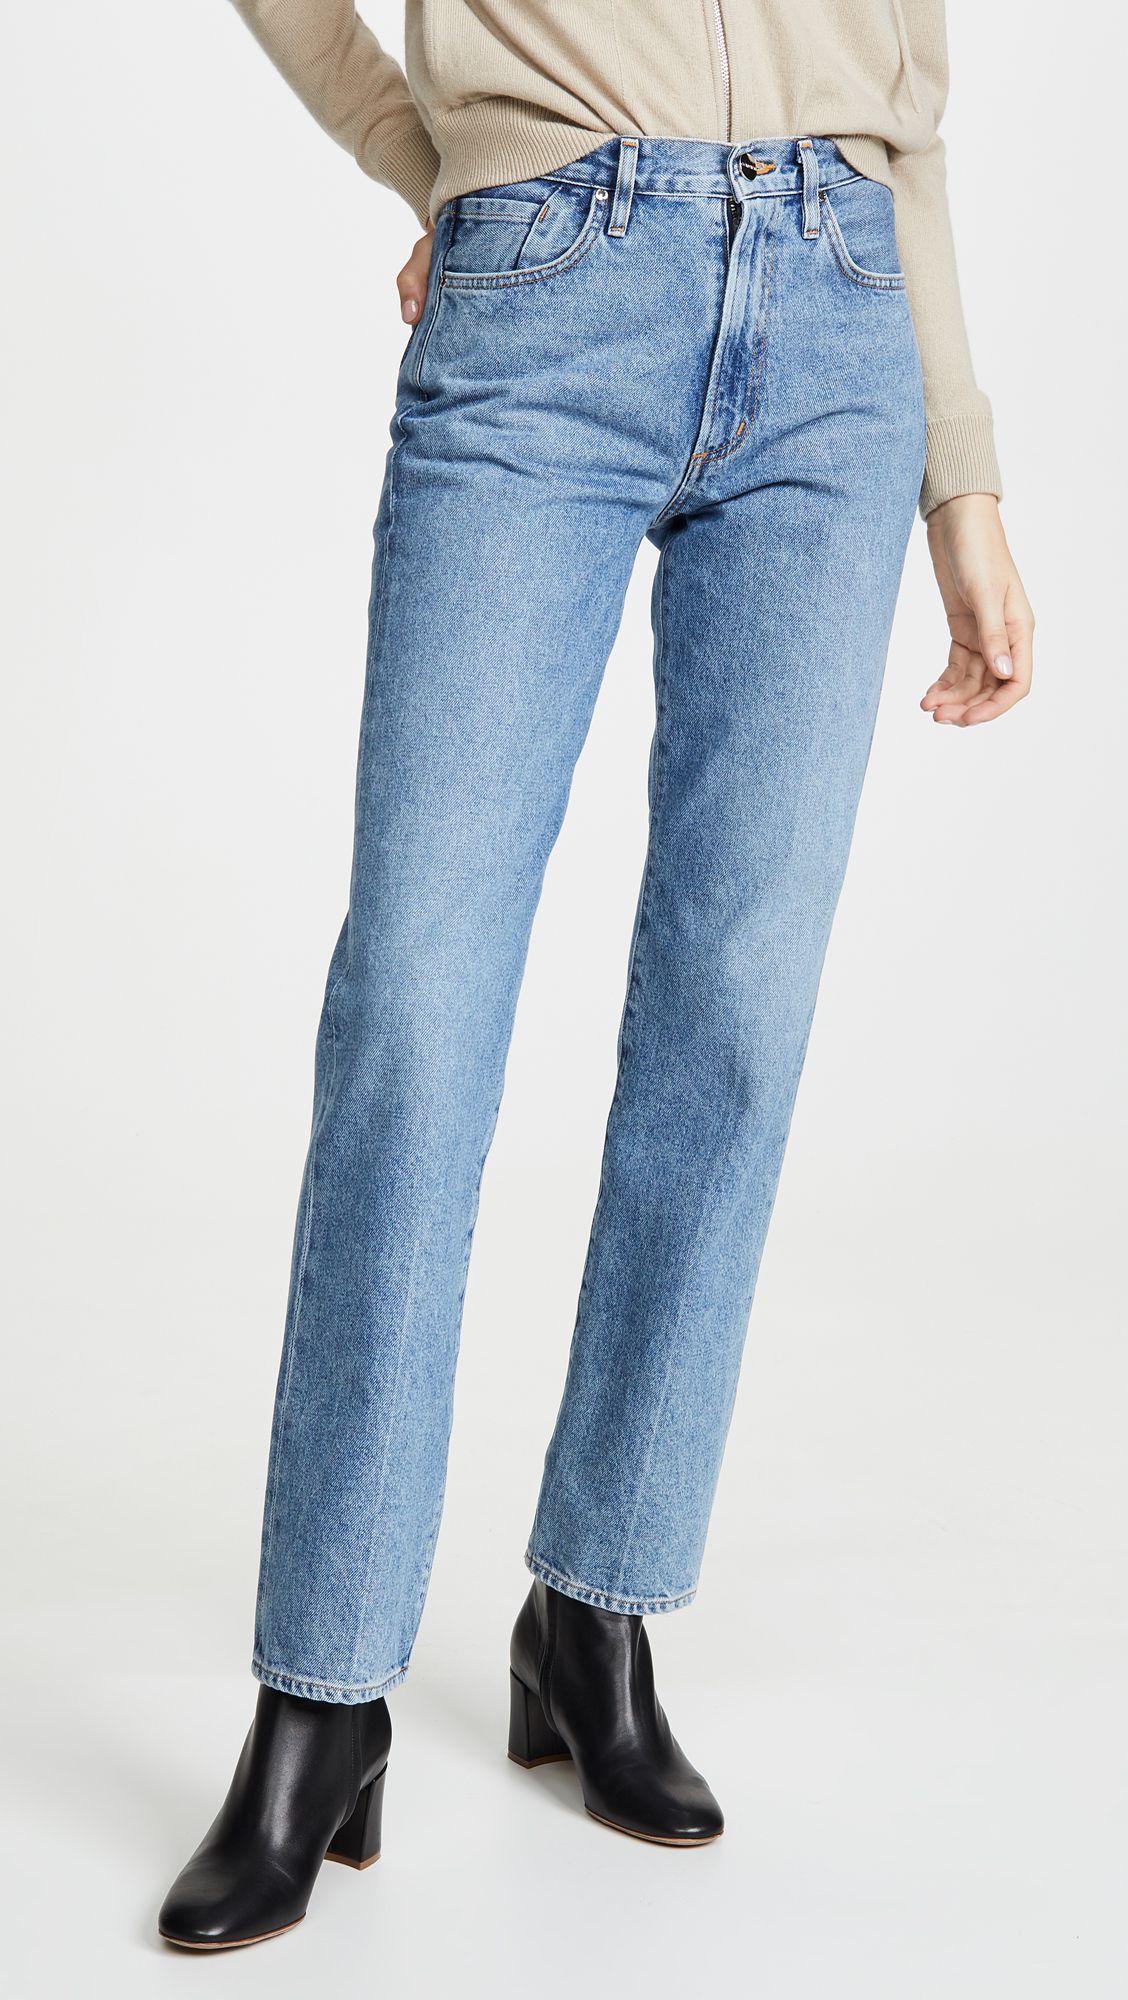 The 25 Best Jeans to Buy for Spring 2020 | Who What Wear